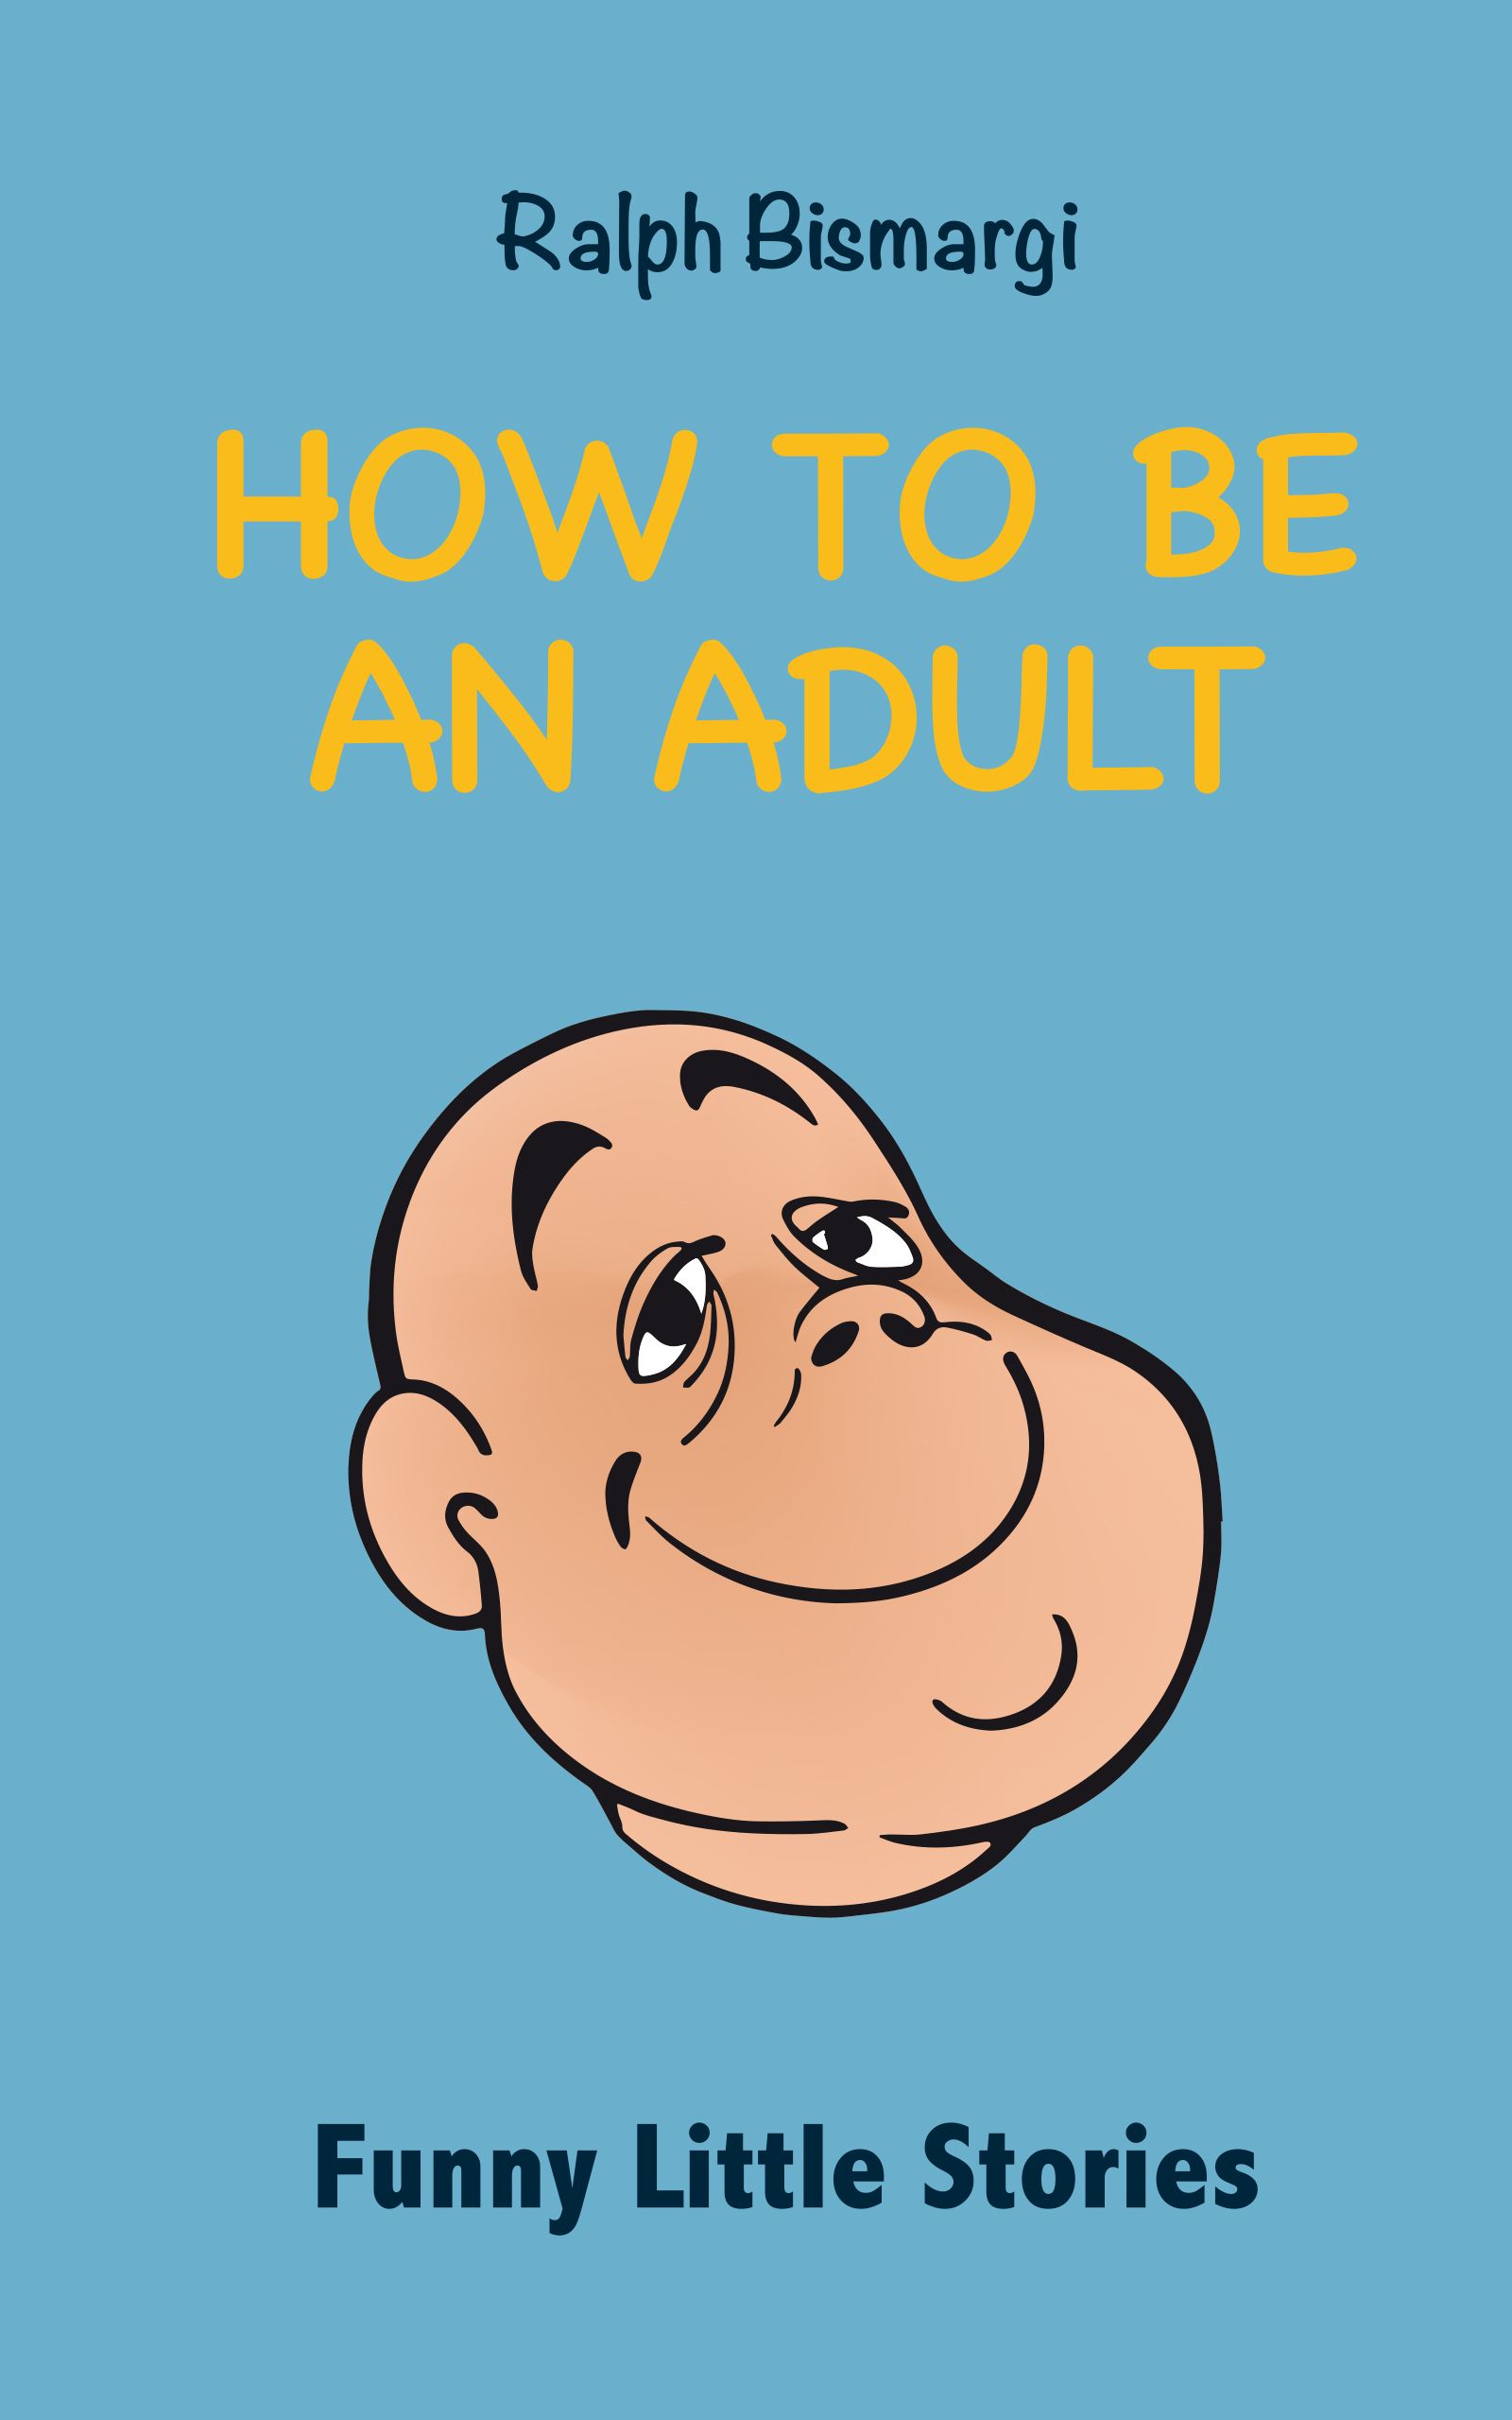 FREE: How To Be An Adult by Ralph Bismargi